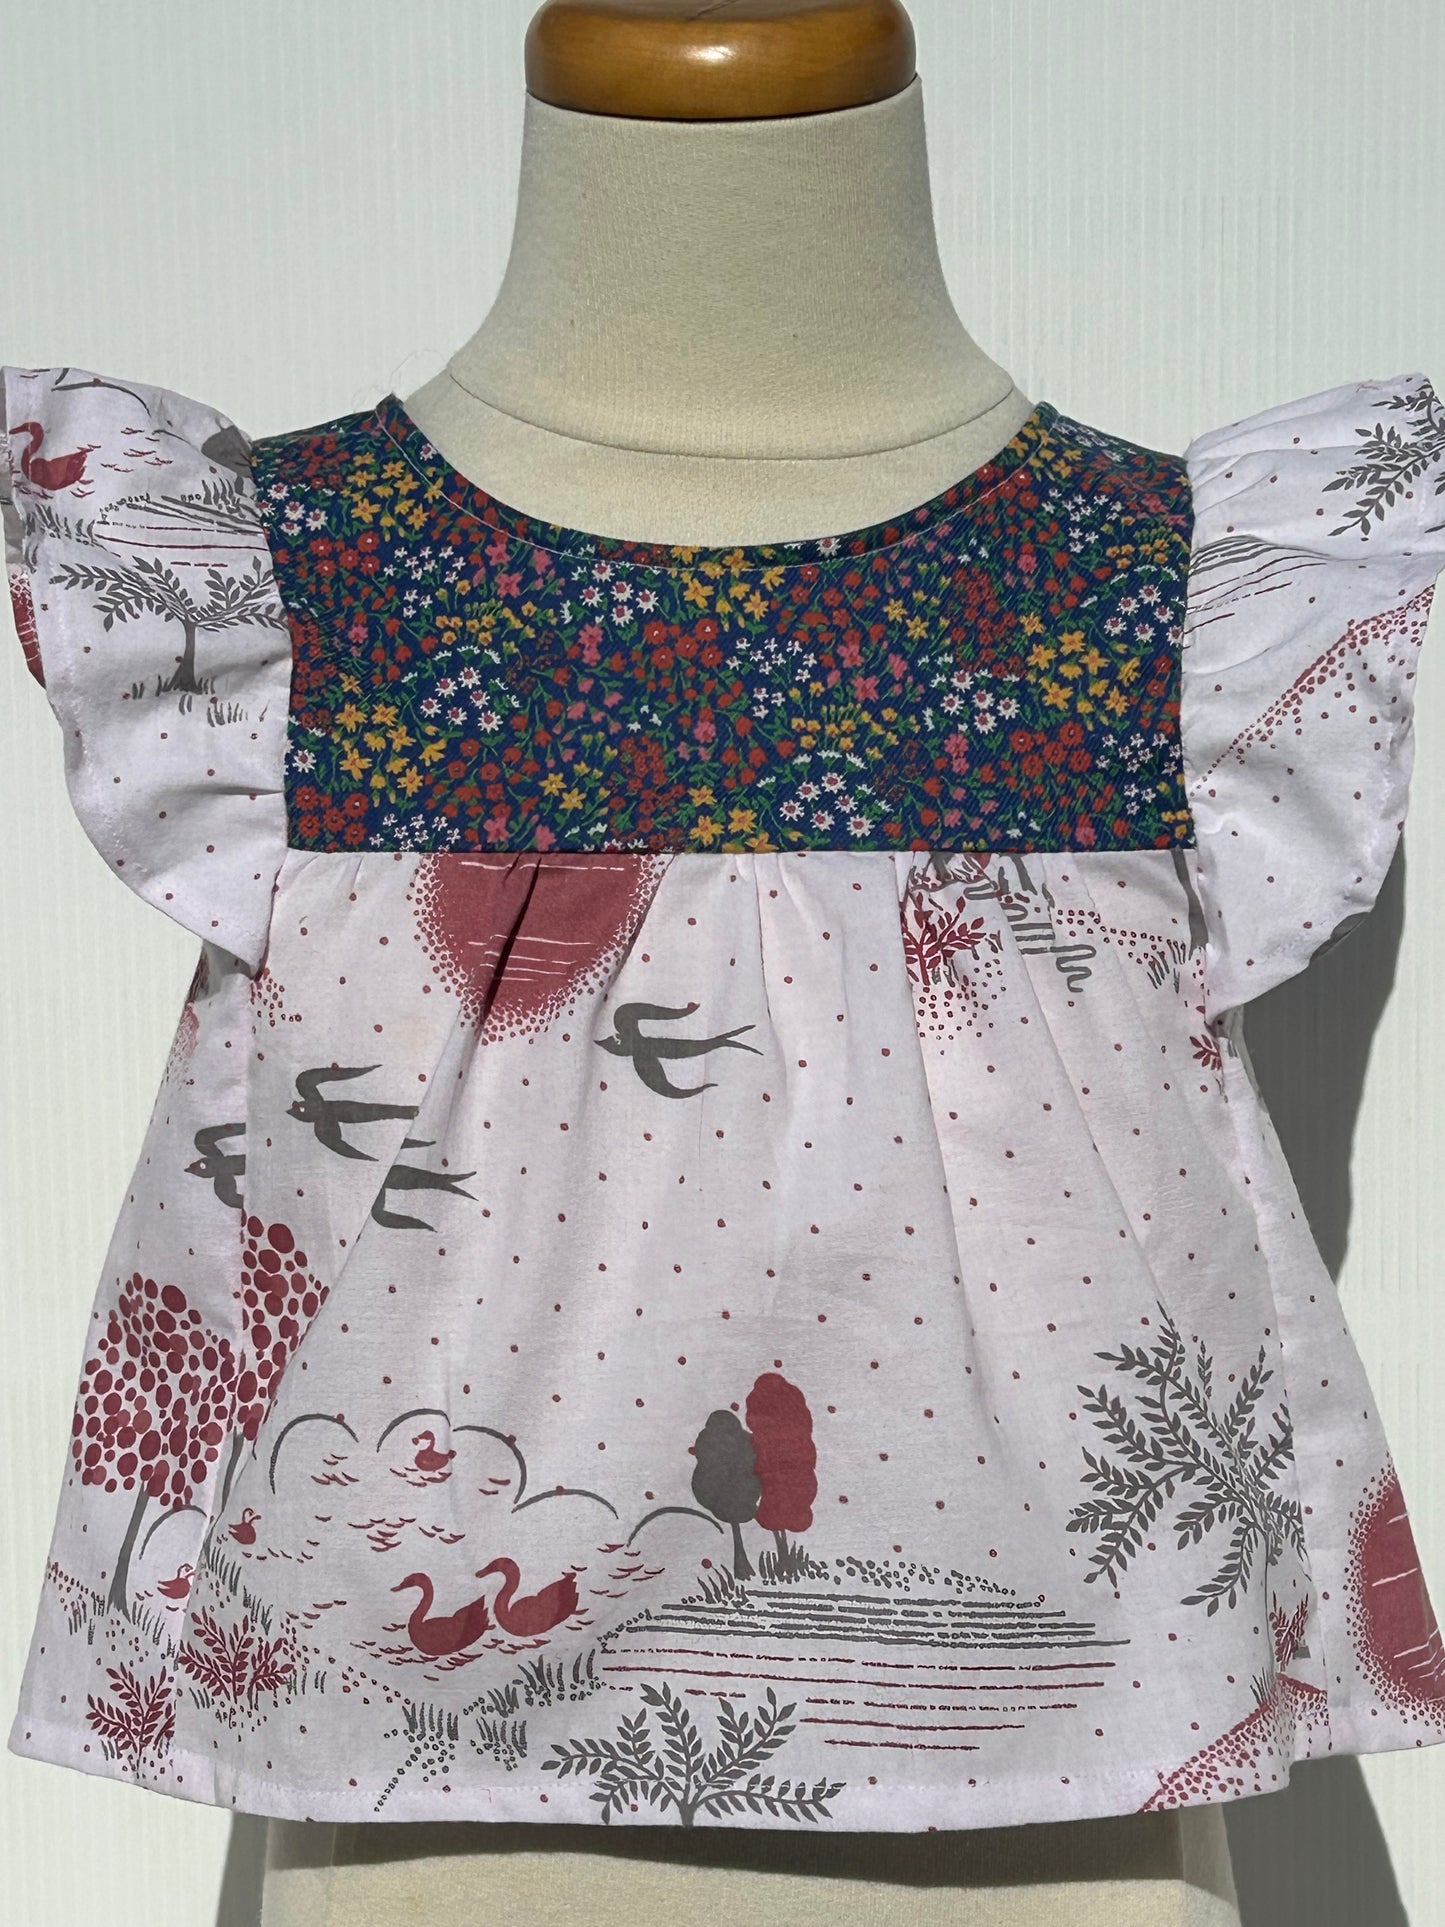 Assorted vintage fabric children’s top - size 4